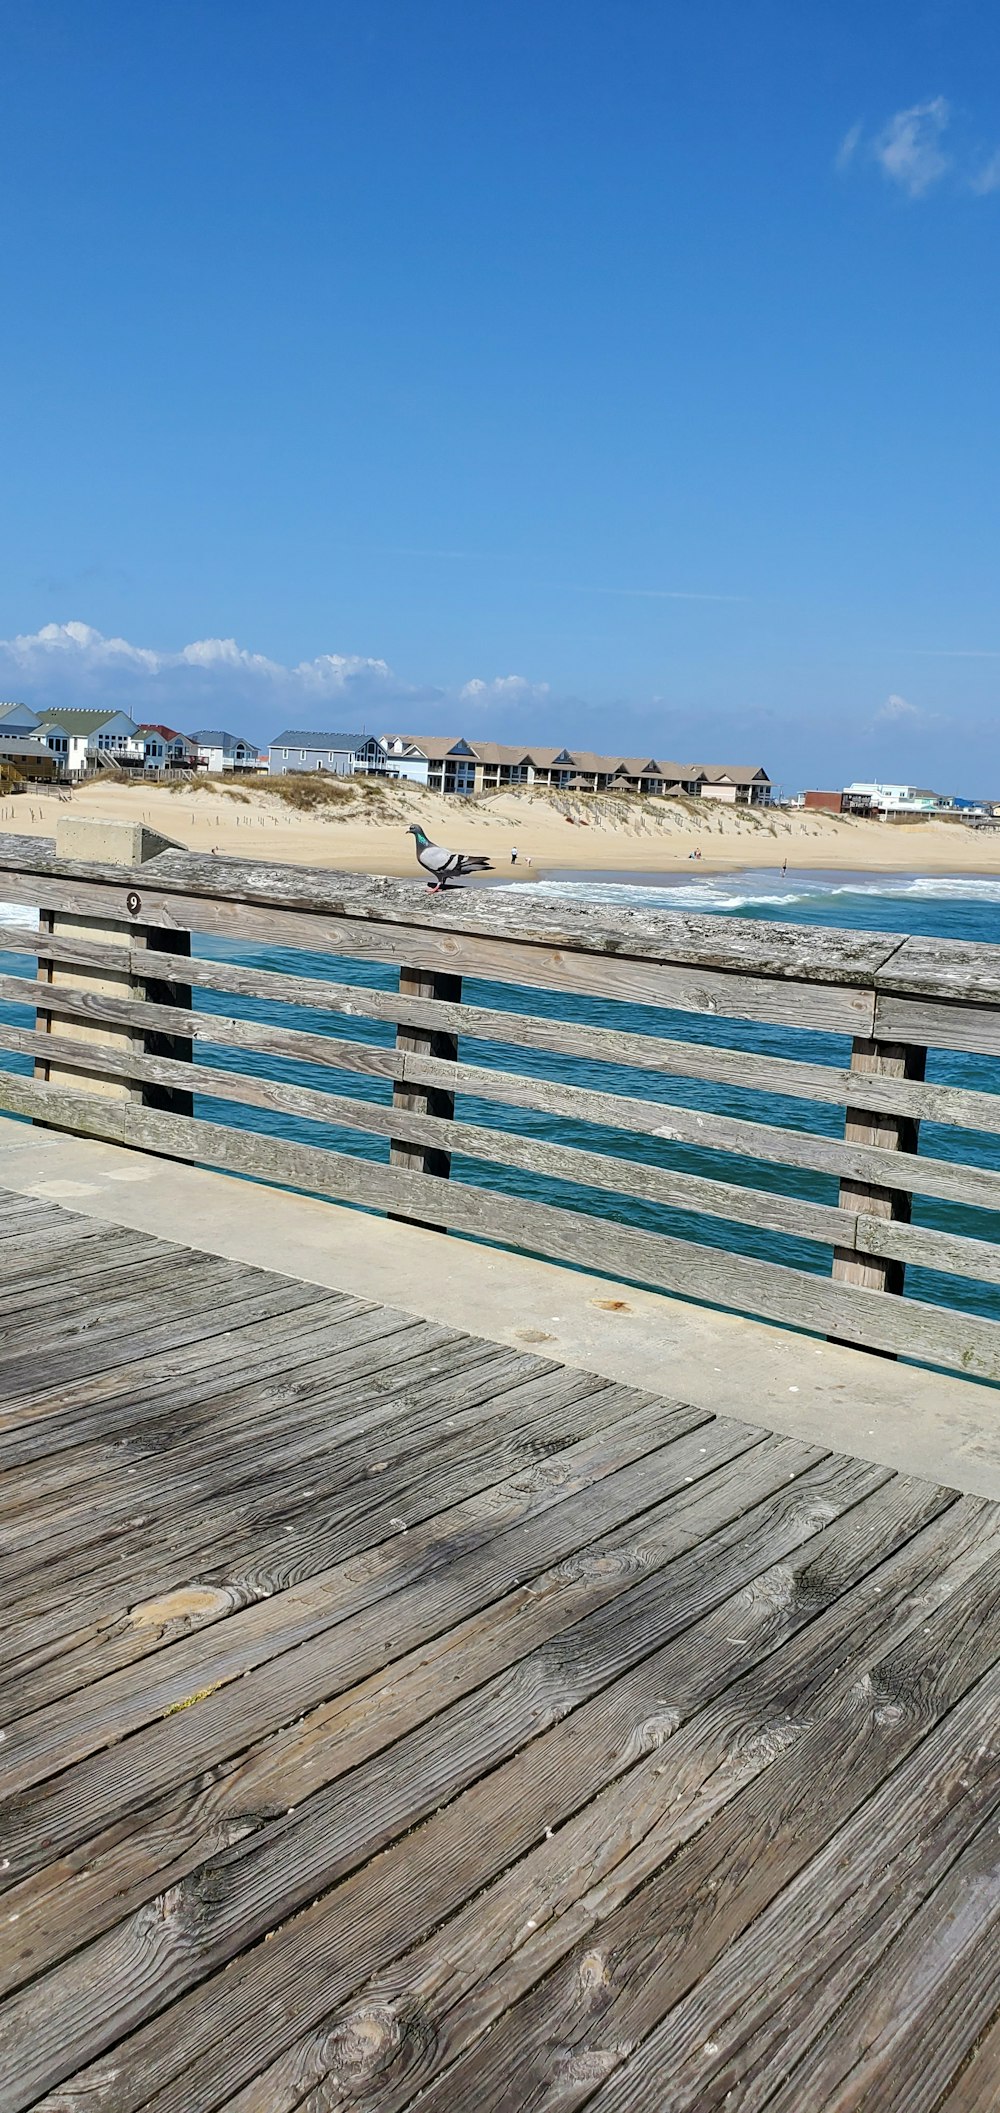 a wooden boardwalk next to a beach with houses in the background